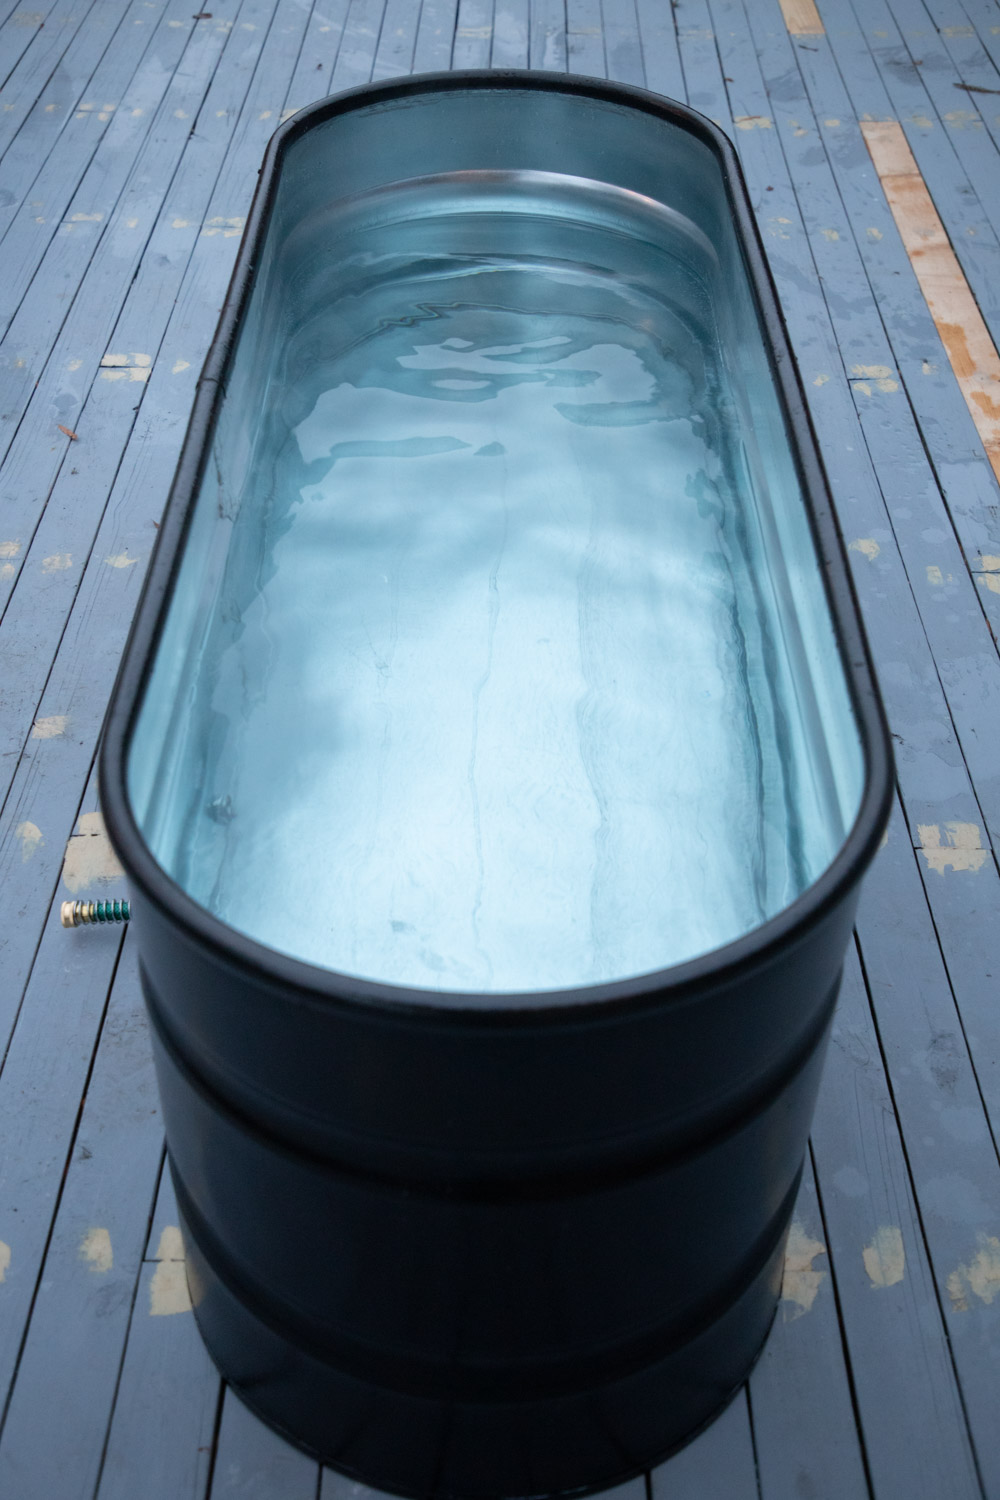 I Converted Our Giant Hot Tub Into A Cold Pool For The Summertime